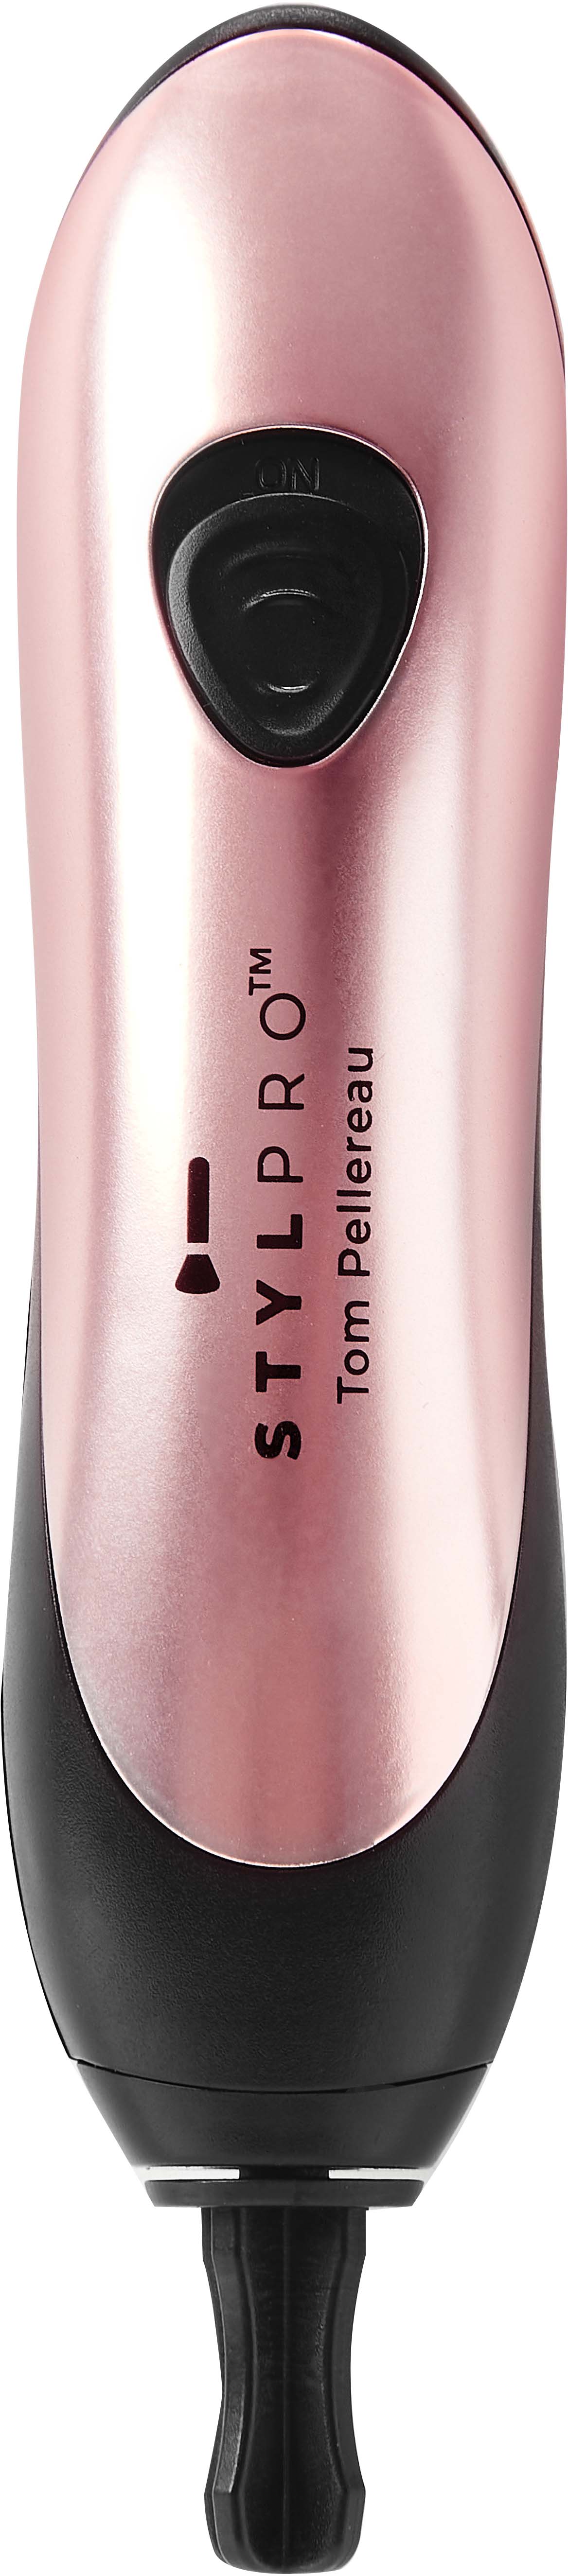 StylPro Makeup Brush Cleaner and Dryer – StylTom ROW